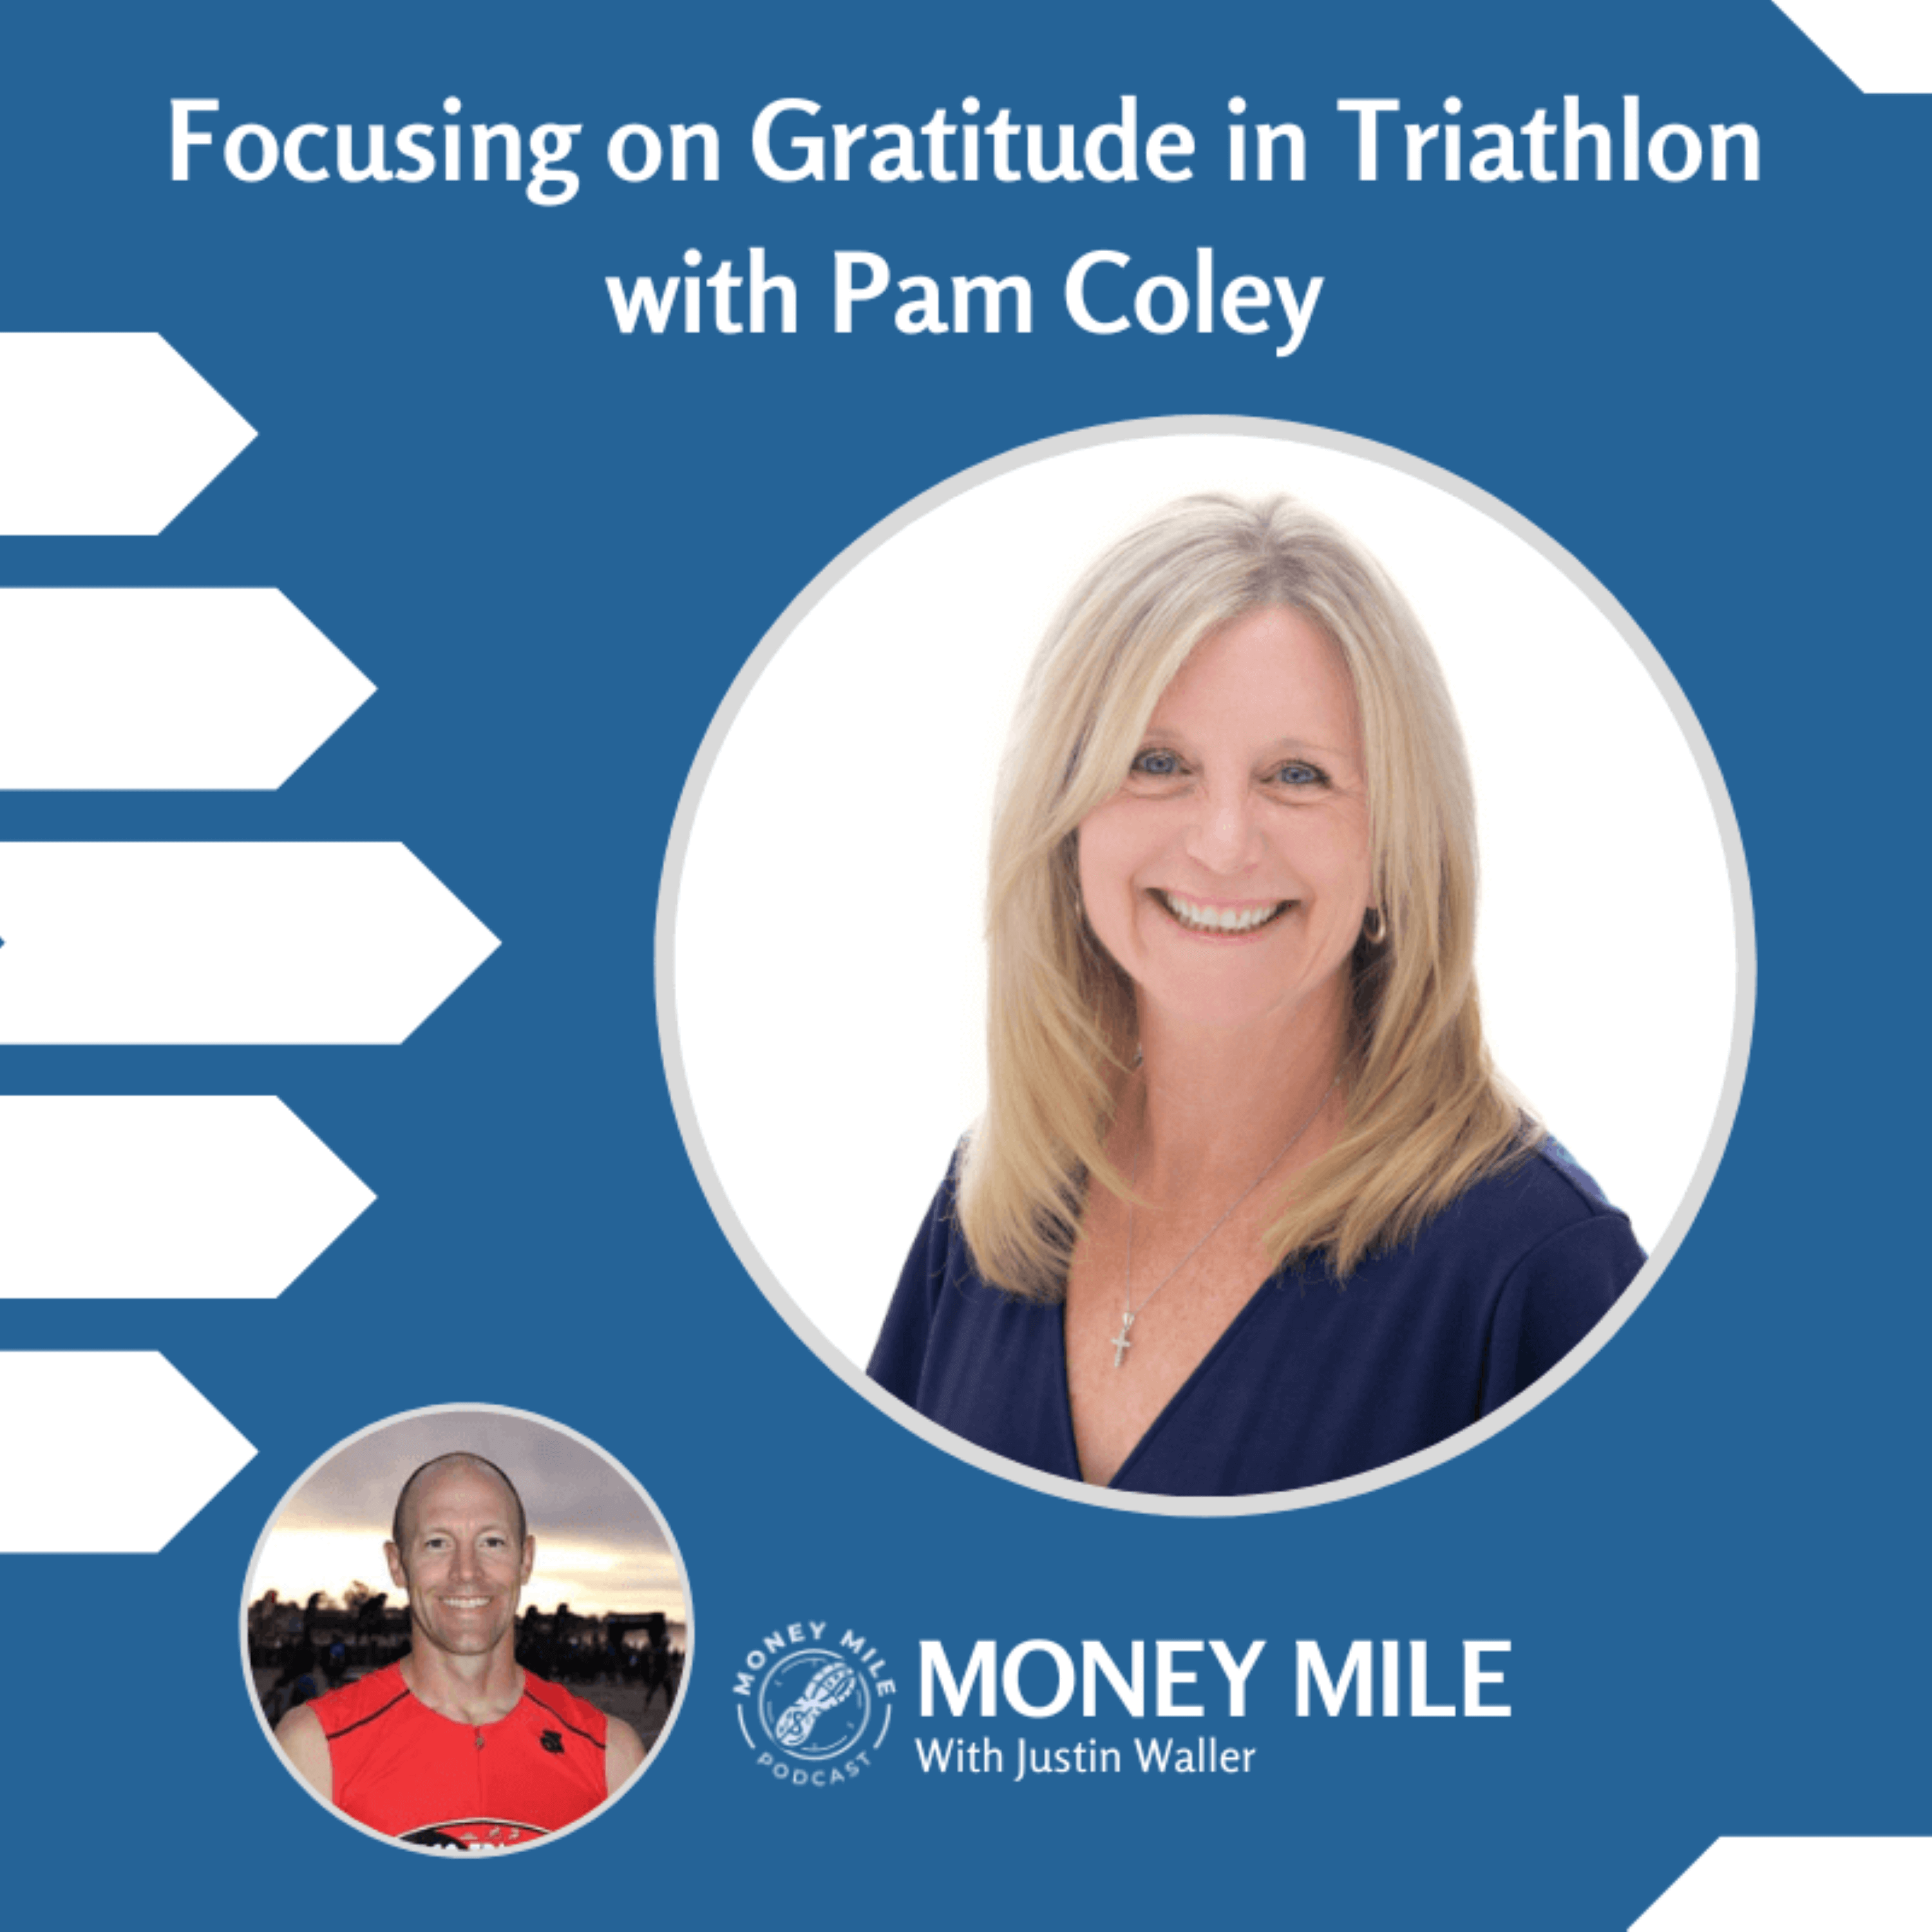 Focusing on Gratitude and Beauty in Triathlon with Pam Coley